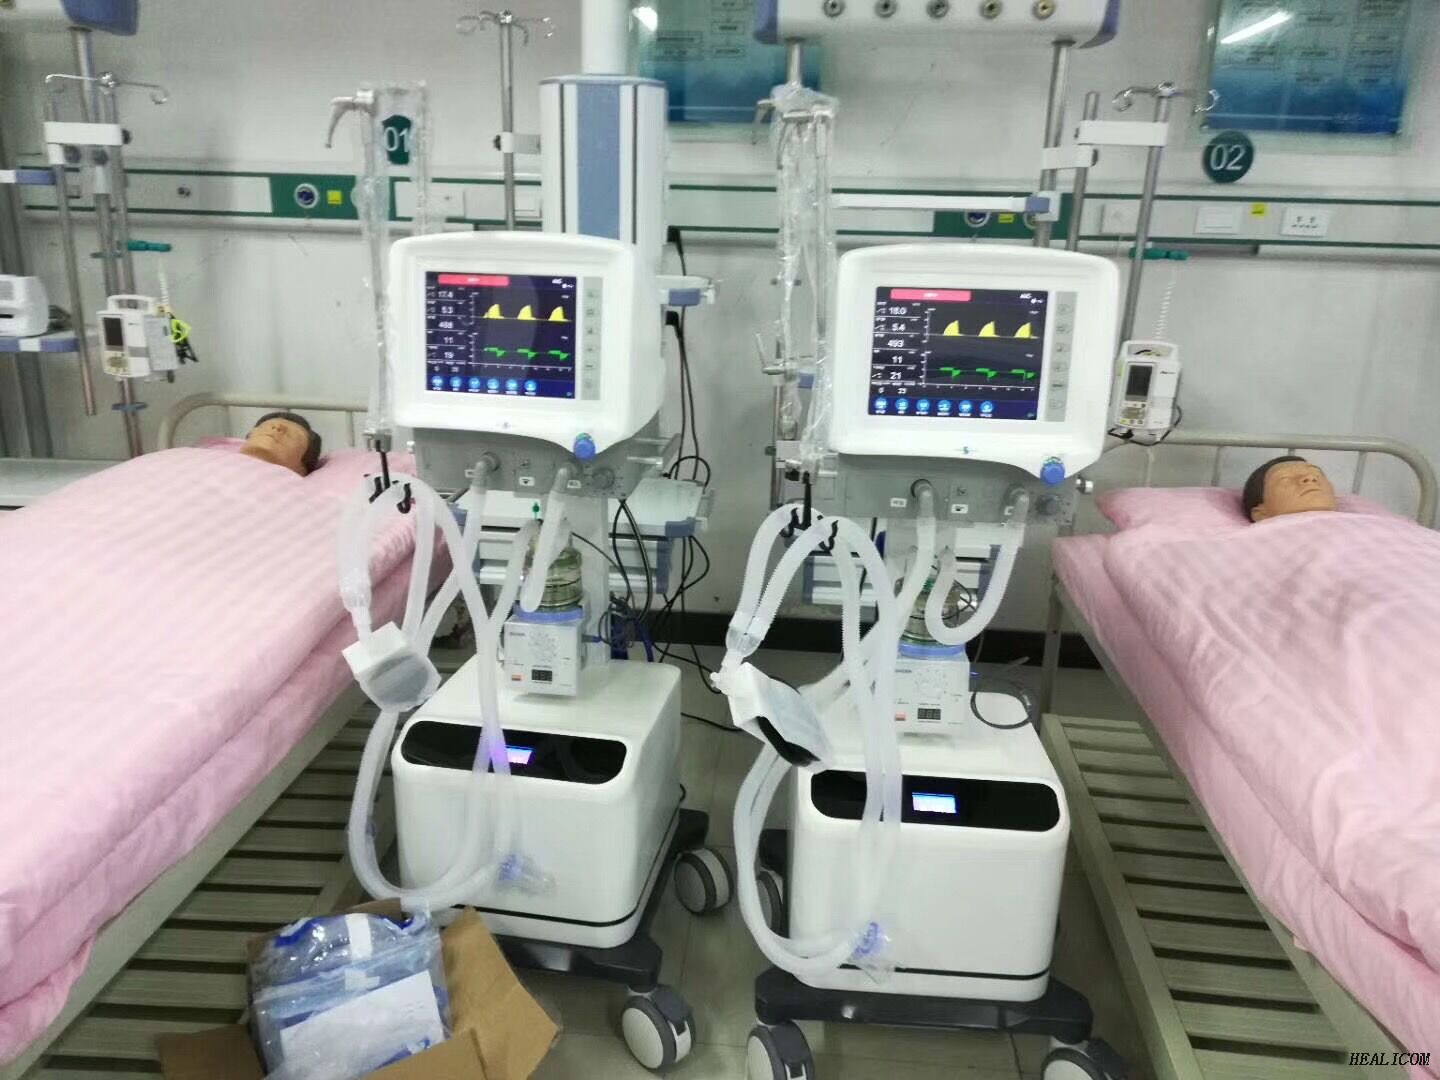 HS-1100 Medical Surgical Hospital Equipment Mobile Trolley Breathing Machine ICU Ventilator Machine for Human or Infant Use